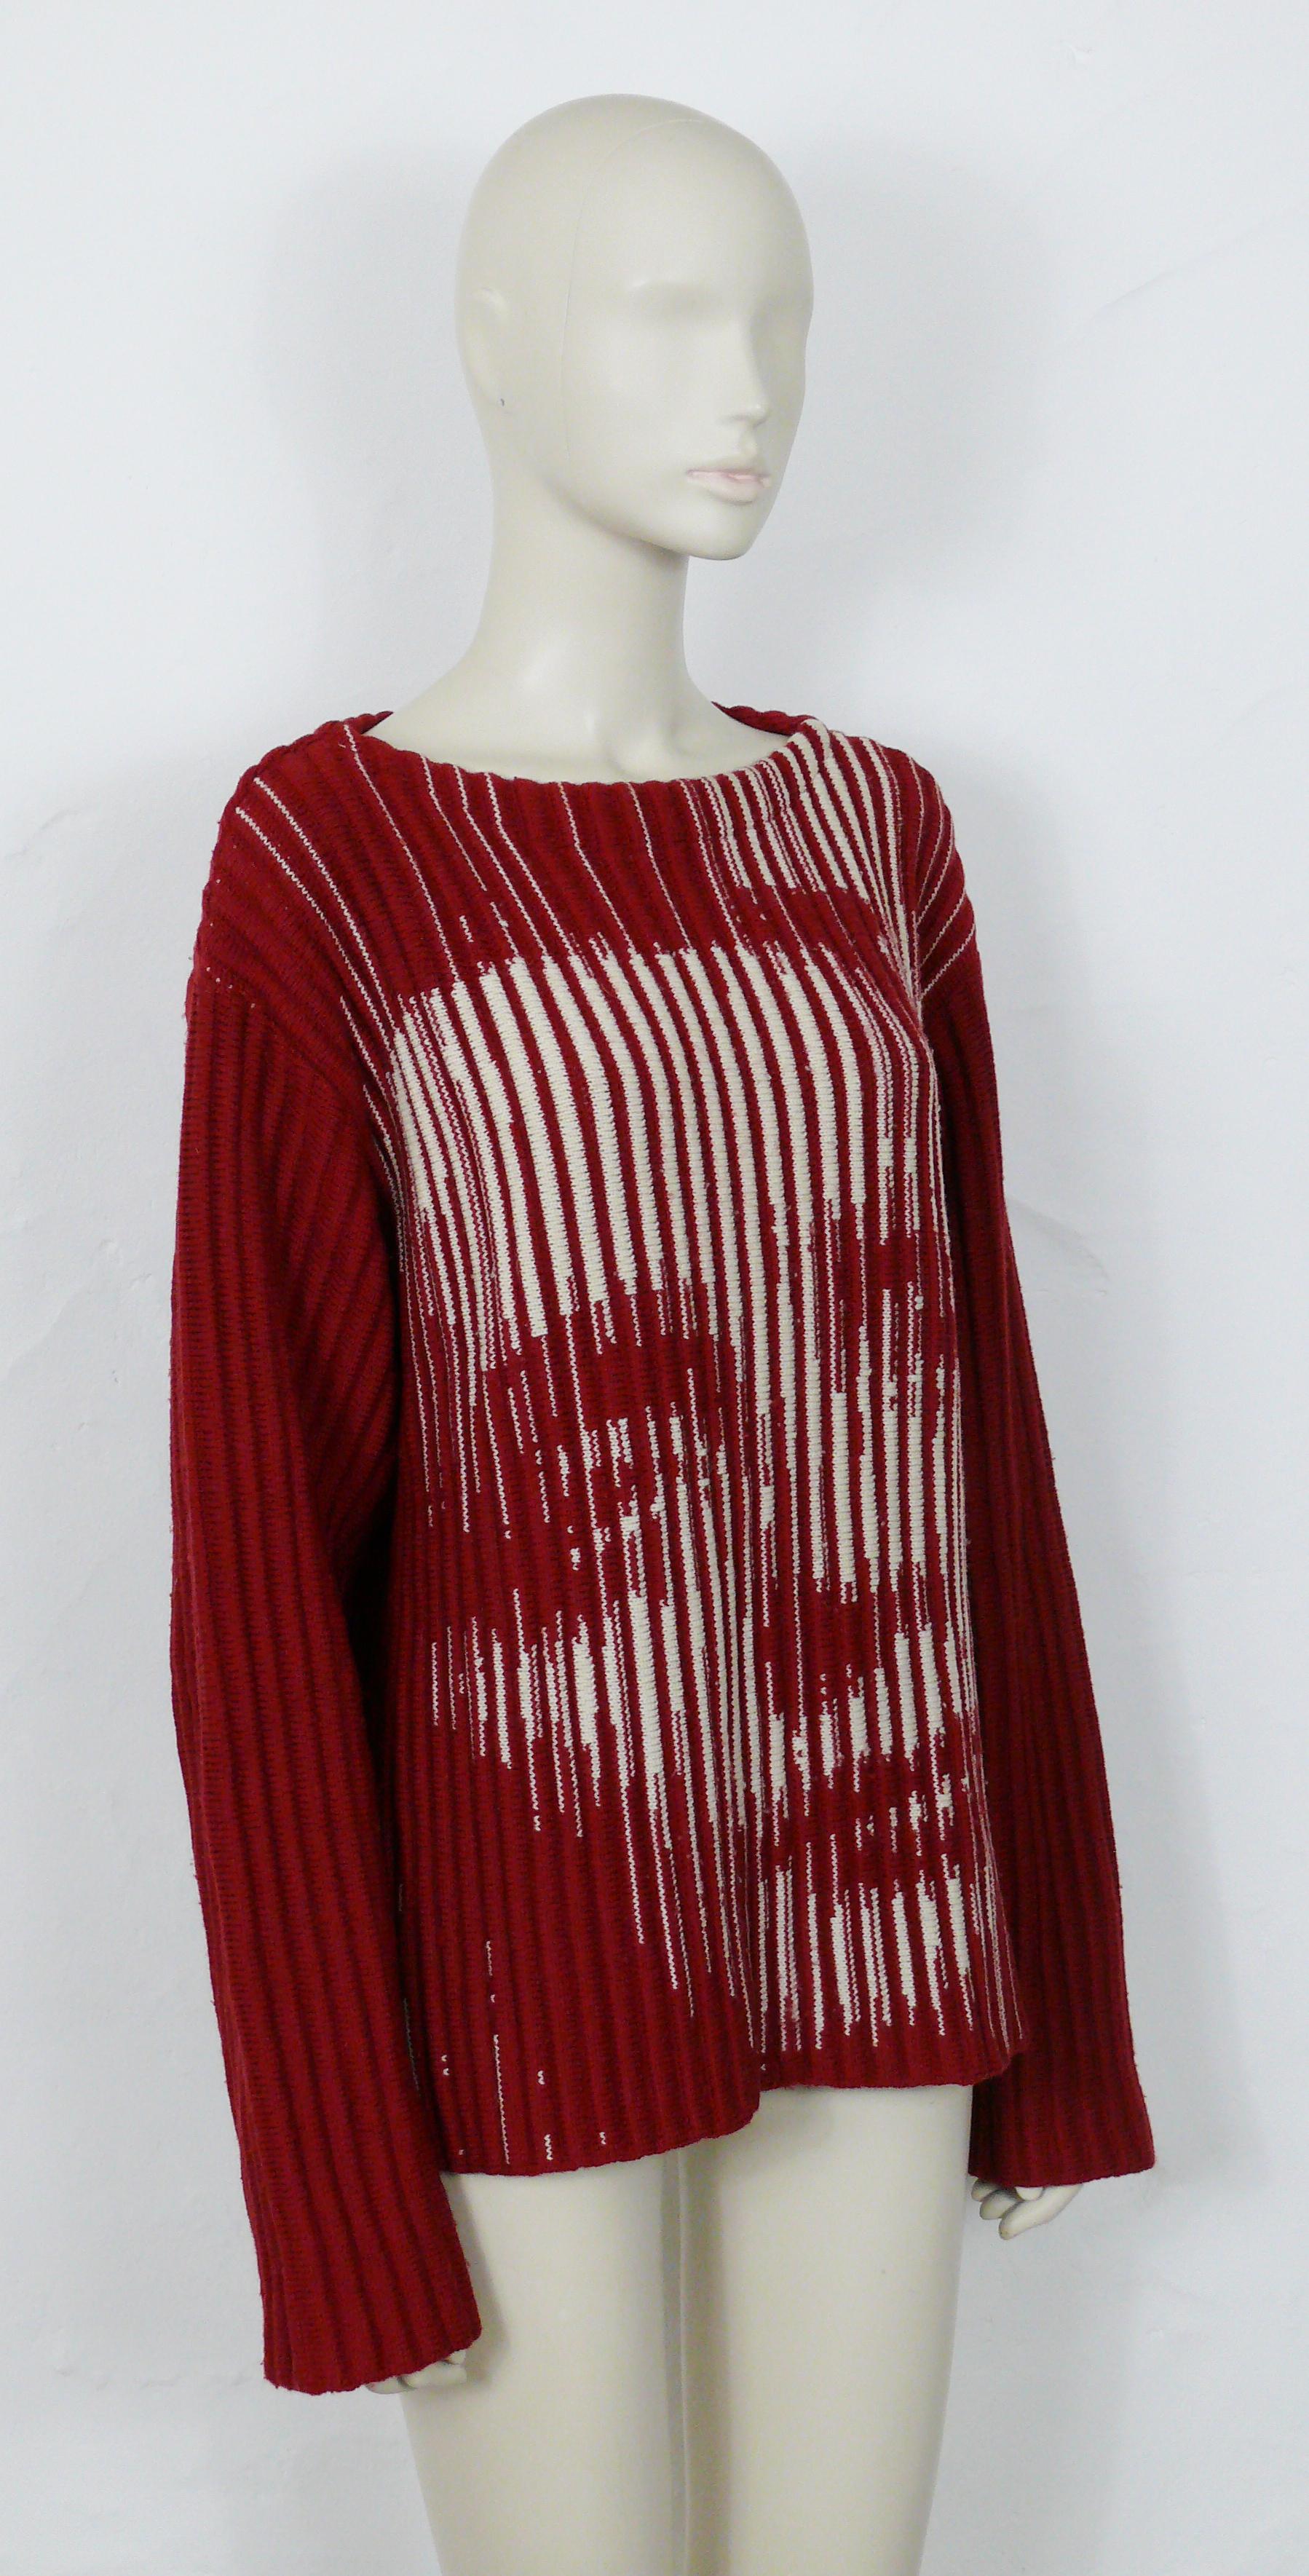 JEAN PAUL GAULTIER Maille Homme vintage optical illusion sweater featuring MARLENE DIETRICH portrait on front.

Label reads JEAN PAUL GAULTIER Maille Homme Made in Italy.

Missing composition tag (most probably wool or wool blend).

Size tag reads :